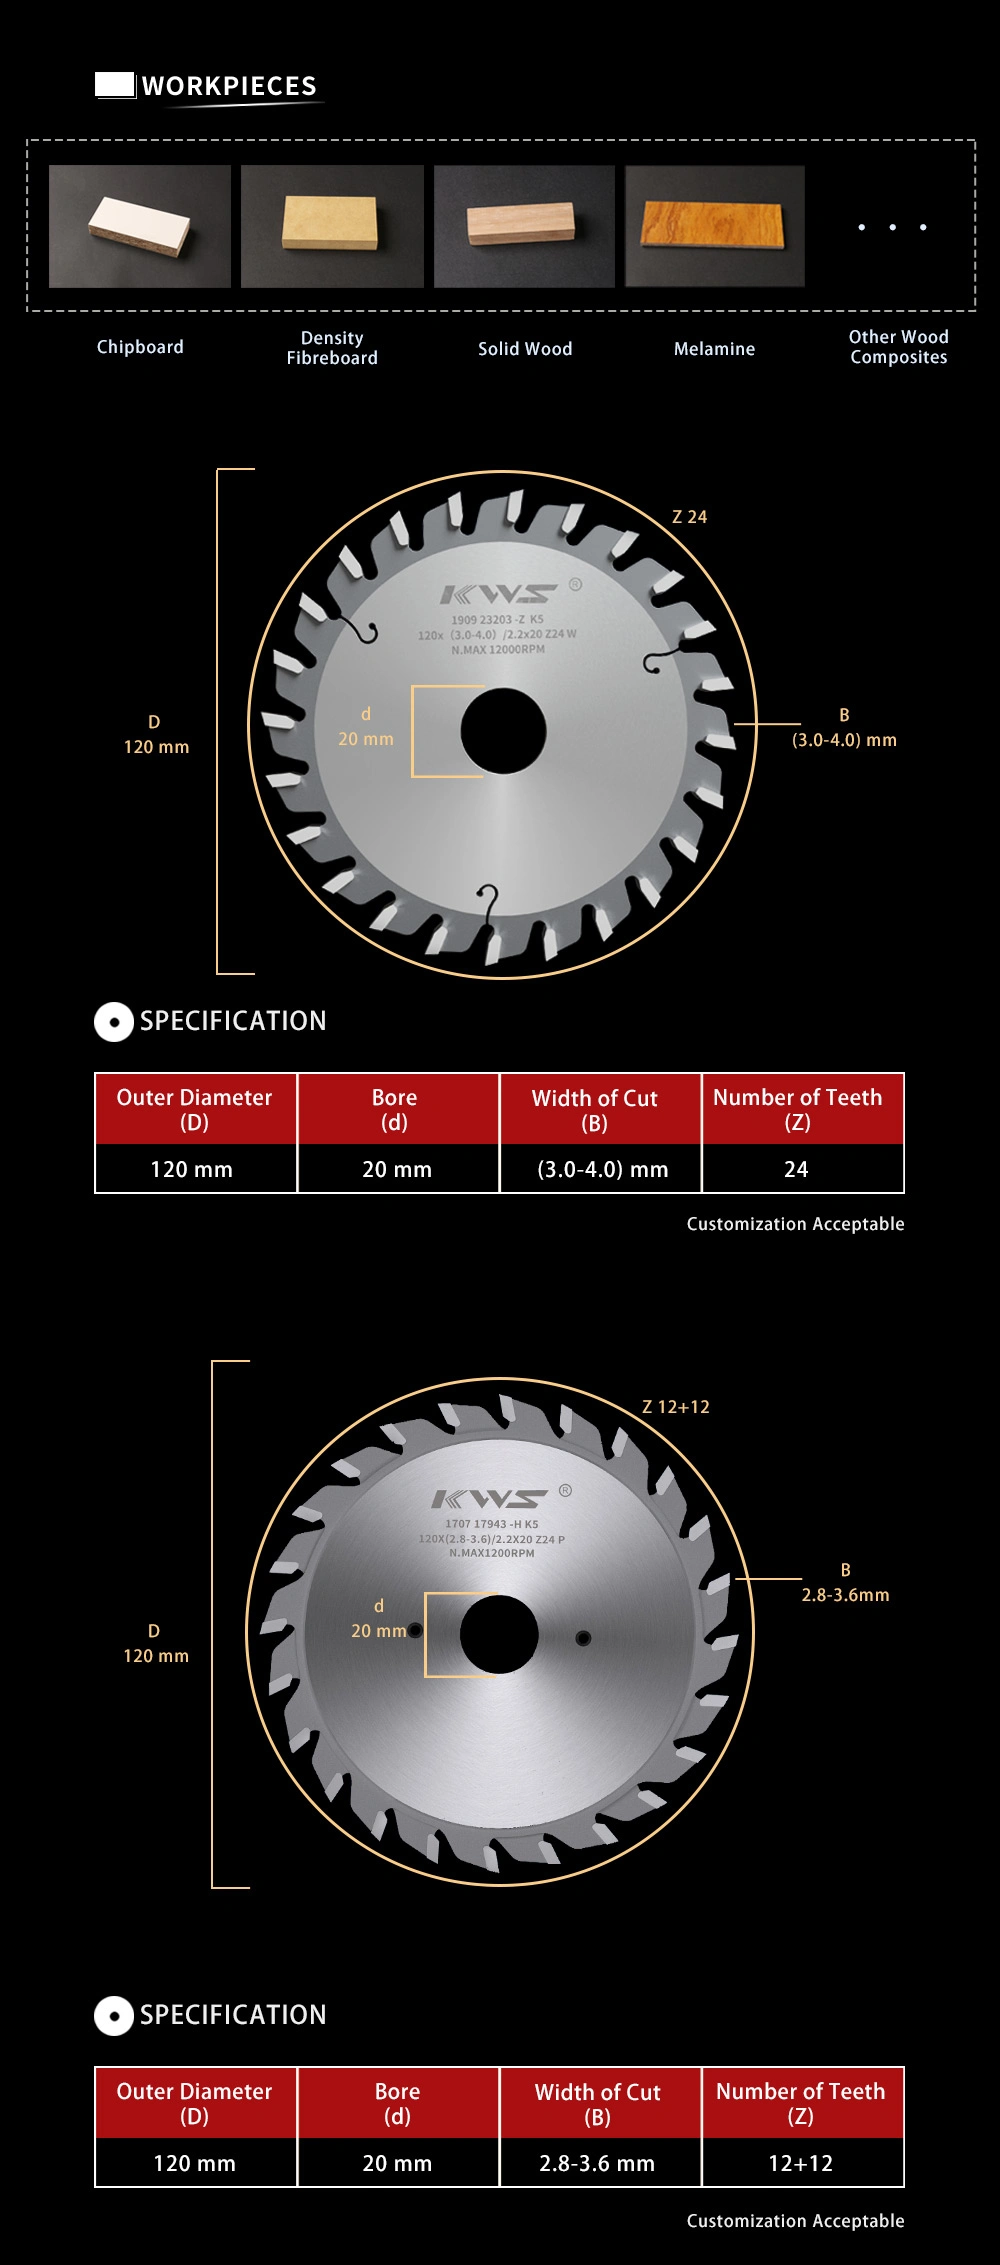 Industrial Tct 120mm Conical Scoring Saw Blades Co+Atb to Score The Coating on Bi-Laminated Panel